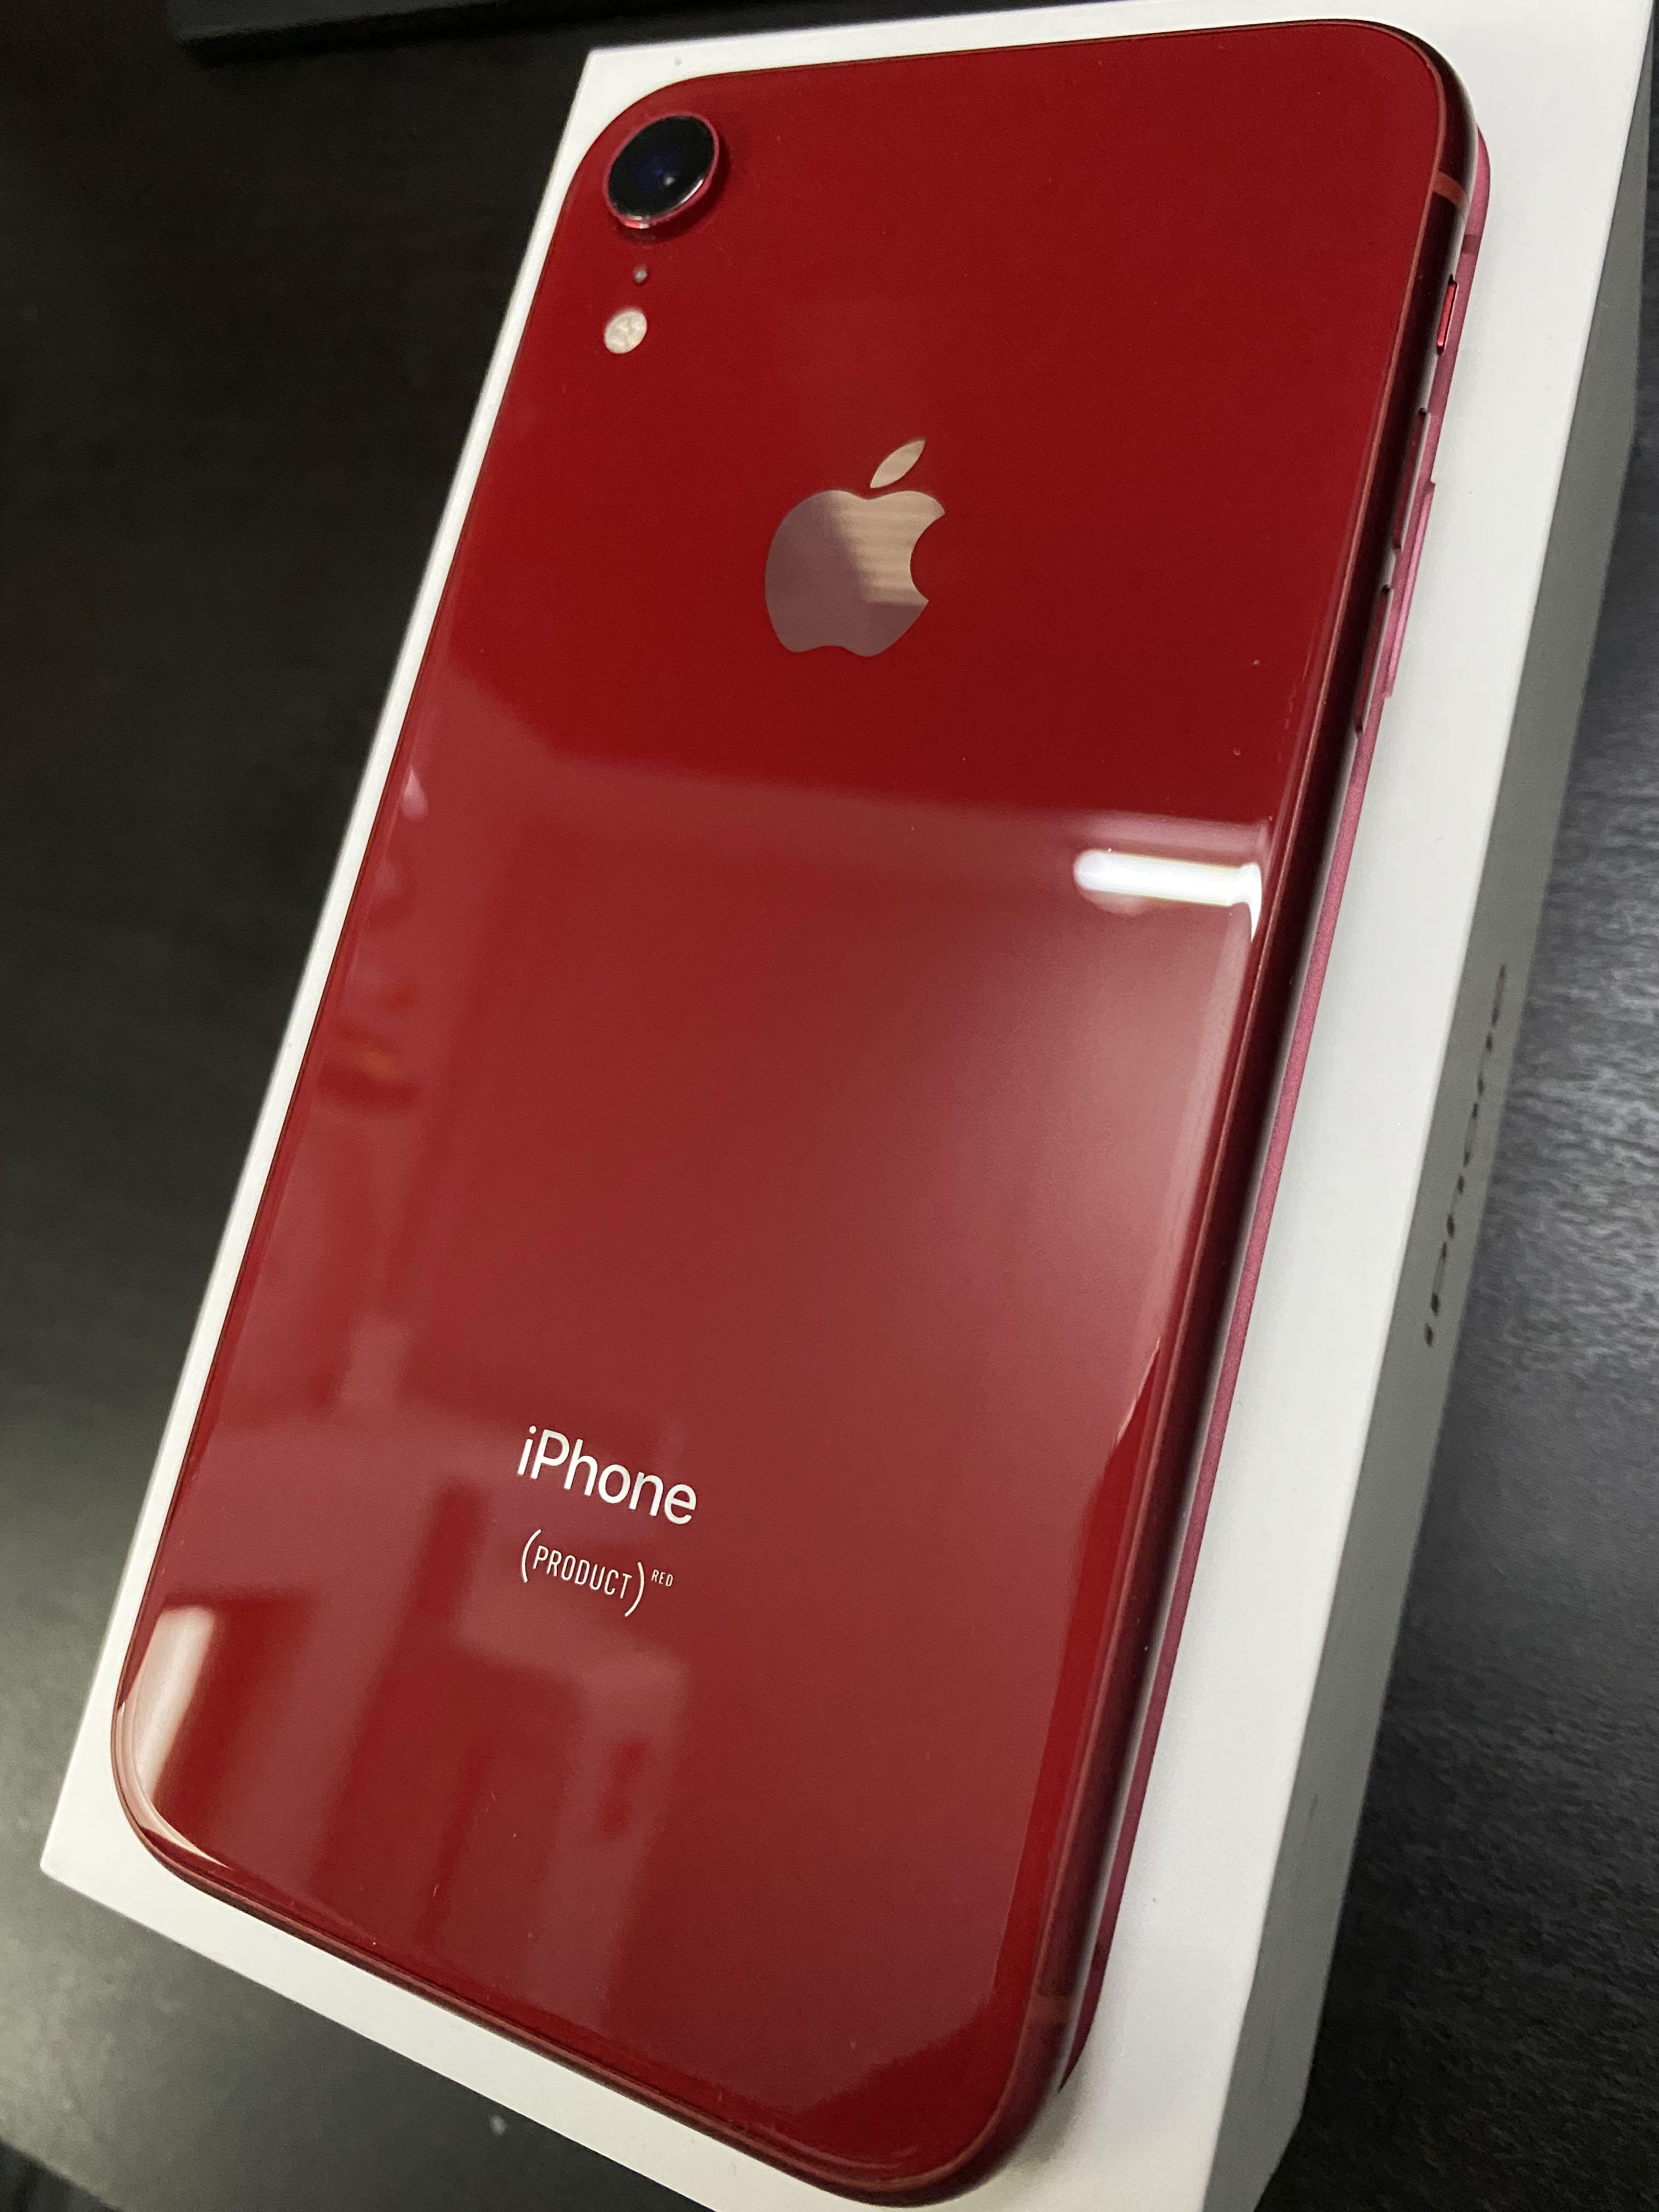 Apple iPhone XR 128GB (product red)